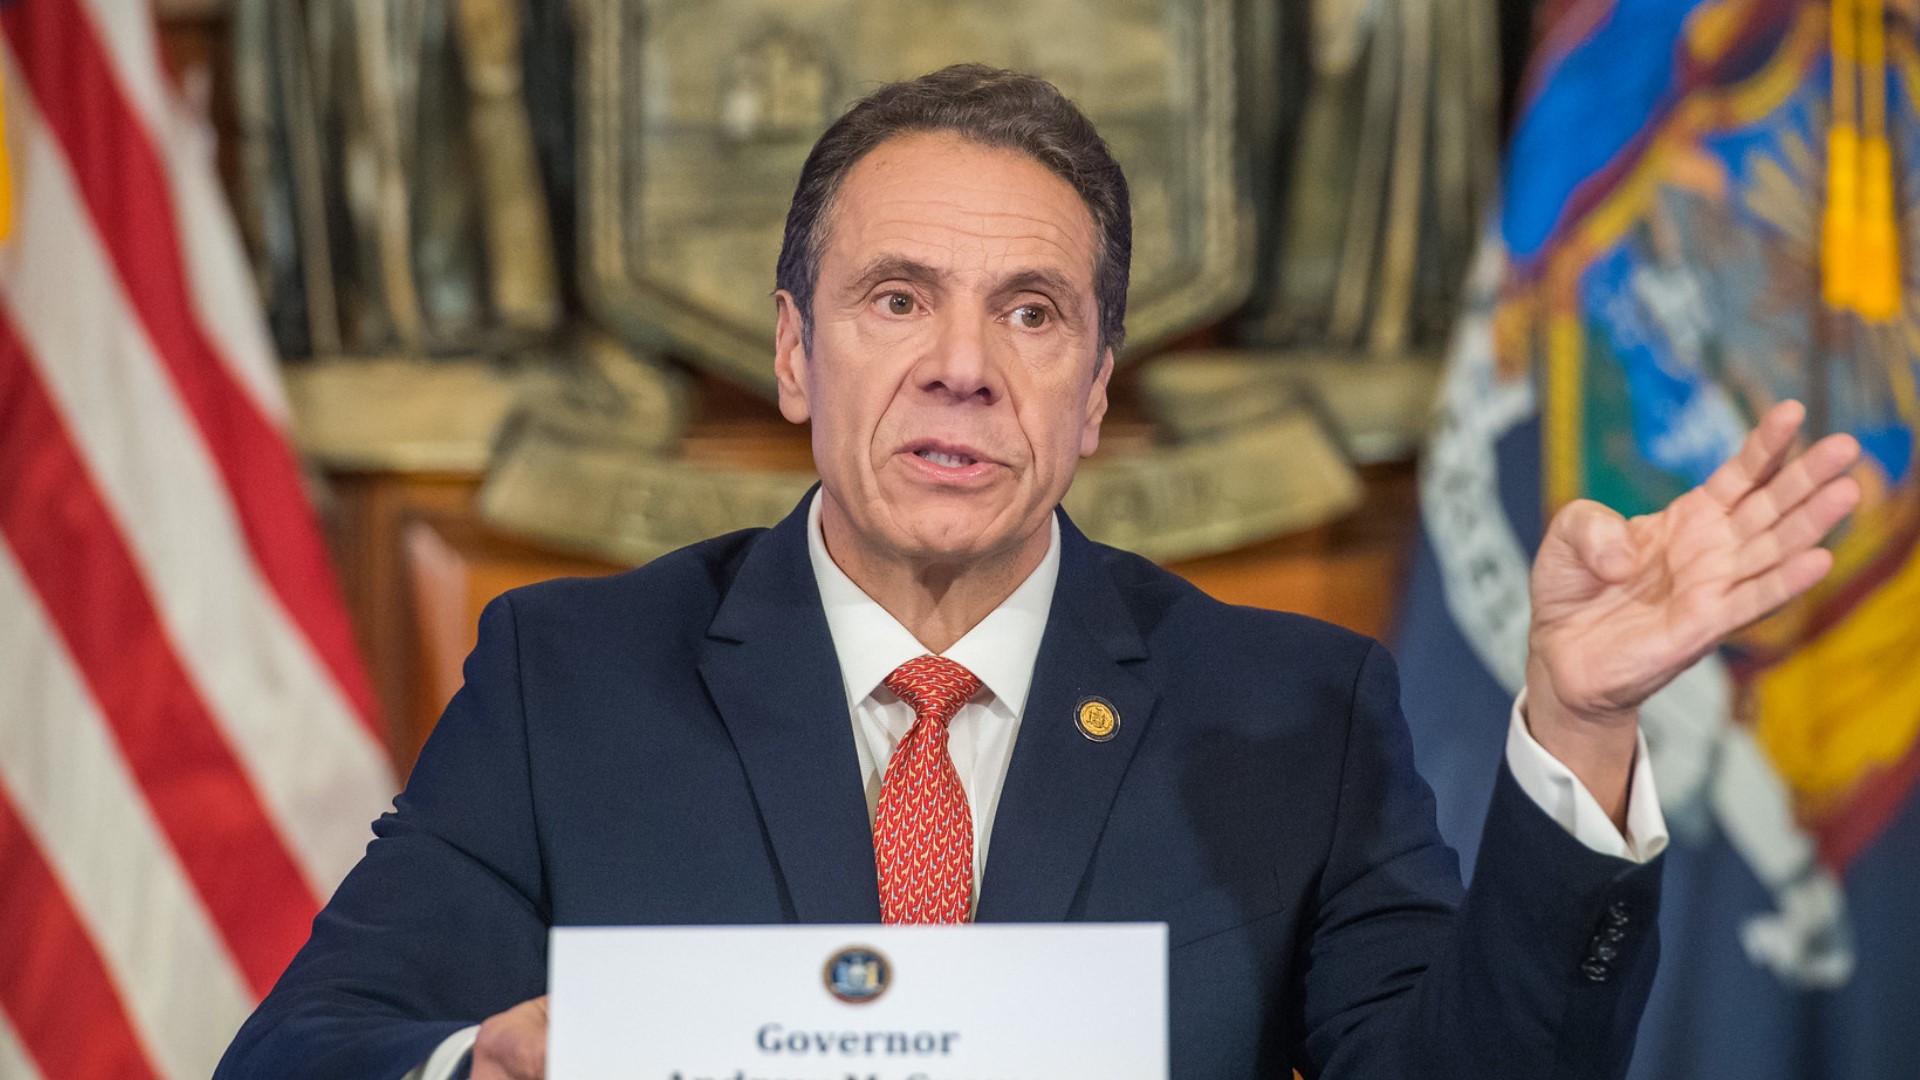 The Manhattan District Attorney is closing the criminal case into former Governor Cuomo's mishandling of COVID-19 nursing home deaths.